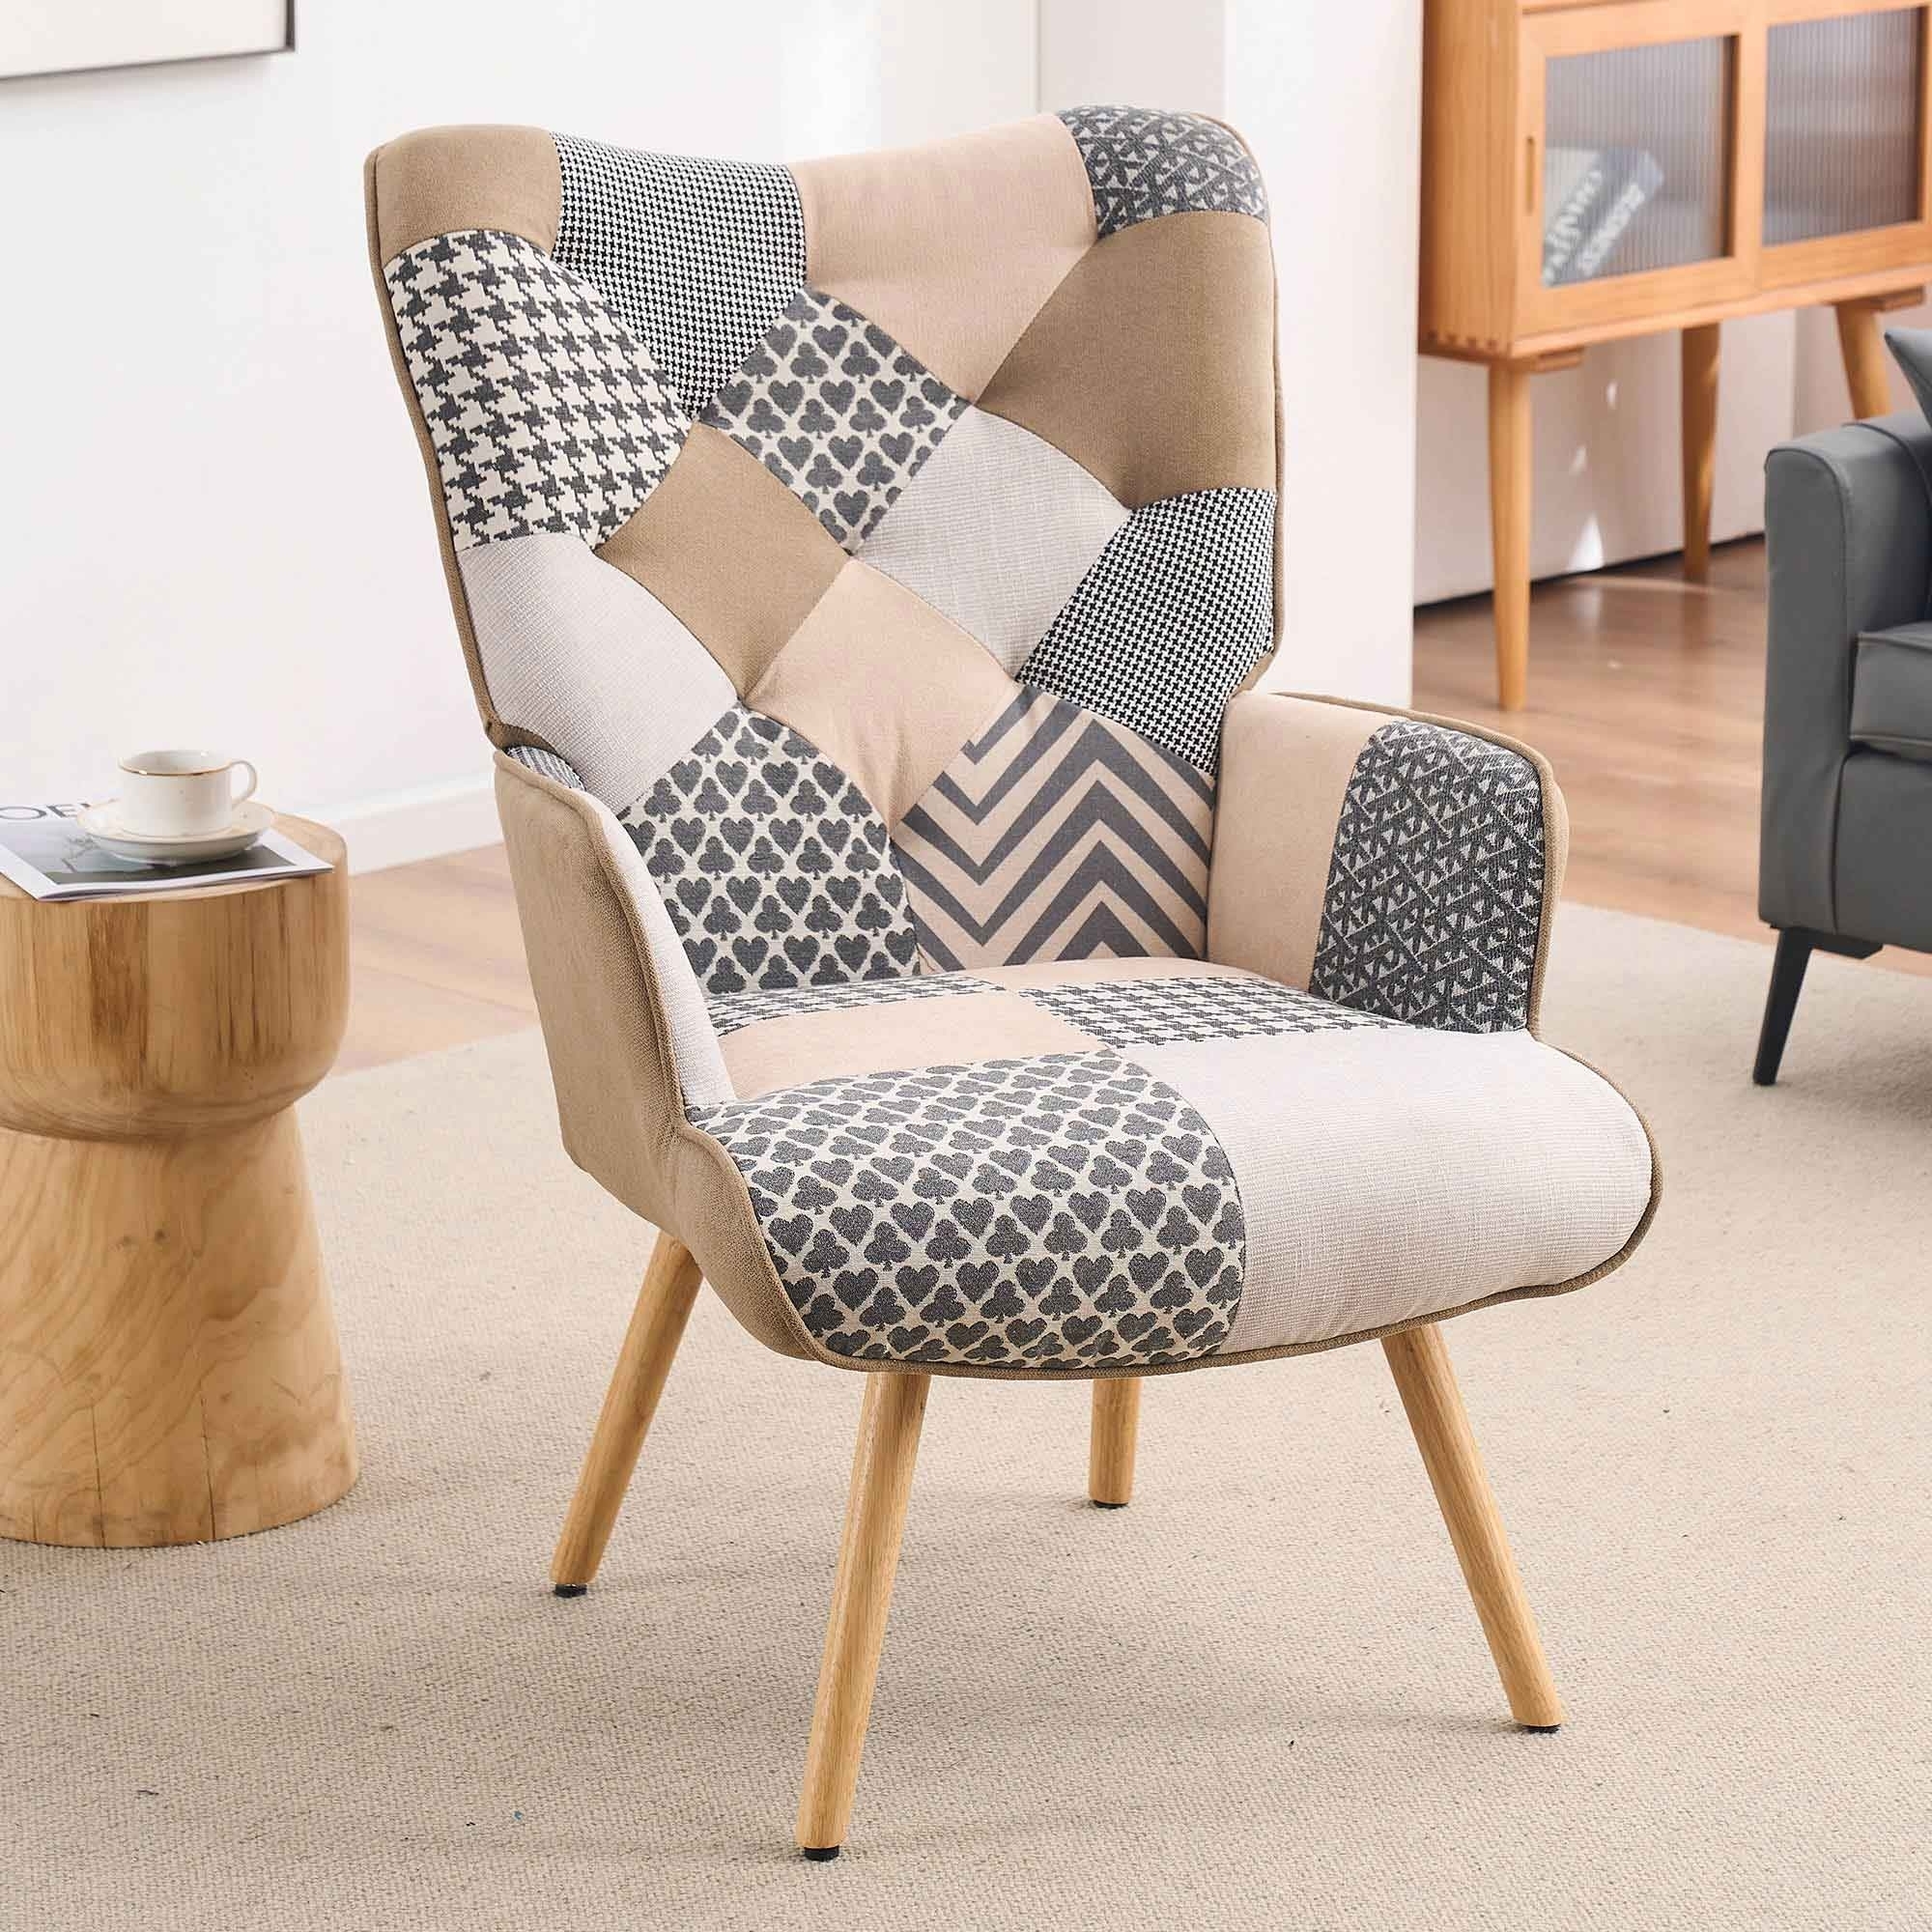 Multi-Colored Patchwork Wingback Accent Chair With Solid Wood Legs, Linen Fabric Napping Armchair For Living Room - Grey